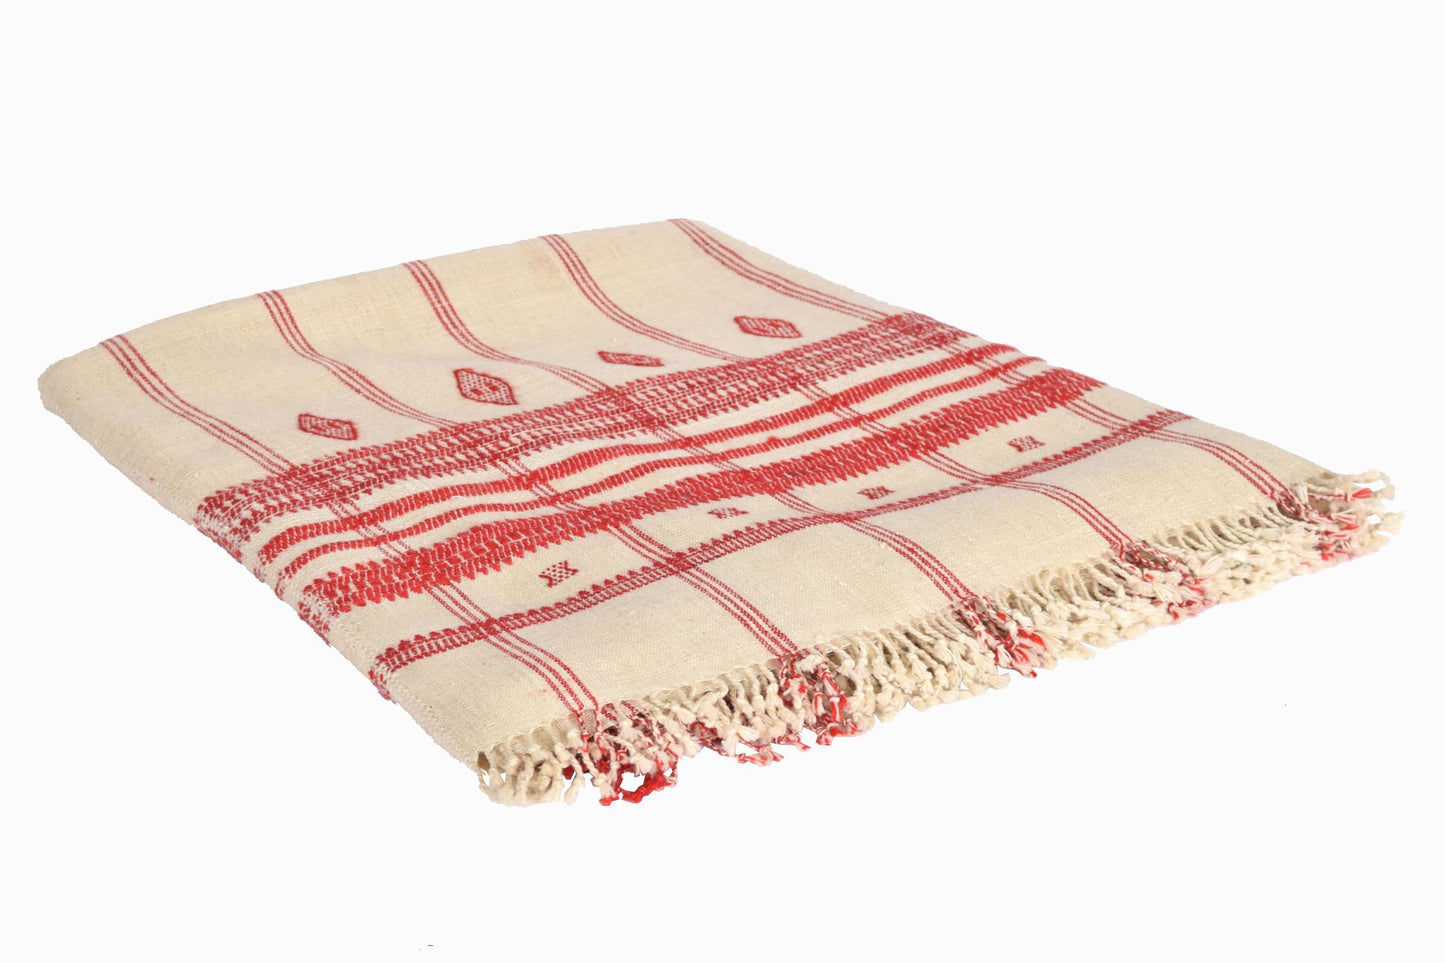 Bedspread BS16 Indian cream and red wool bedspread